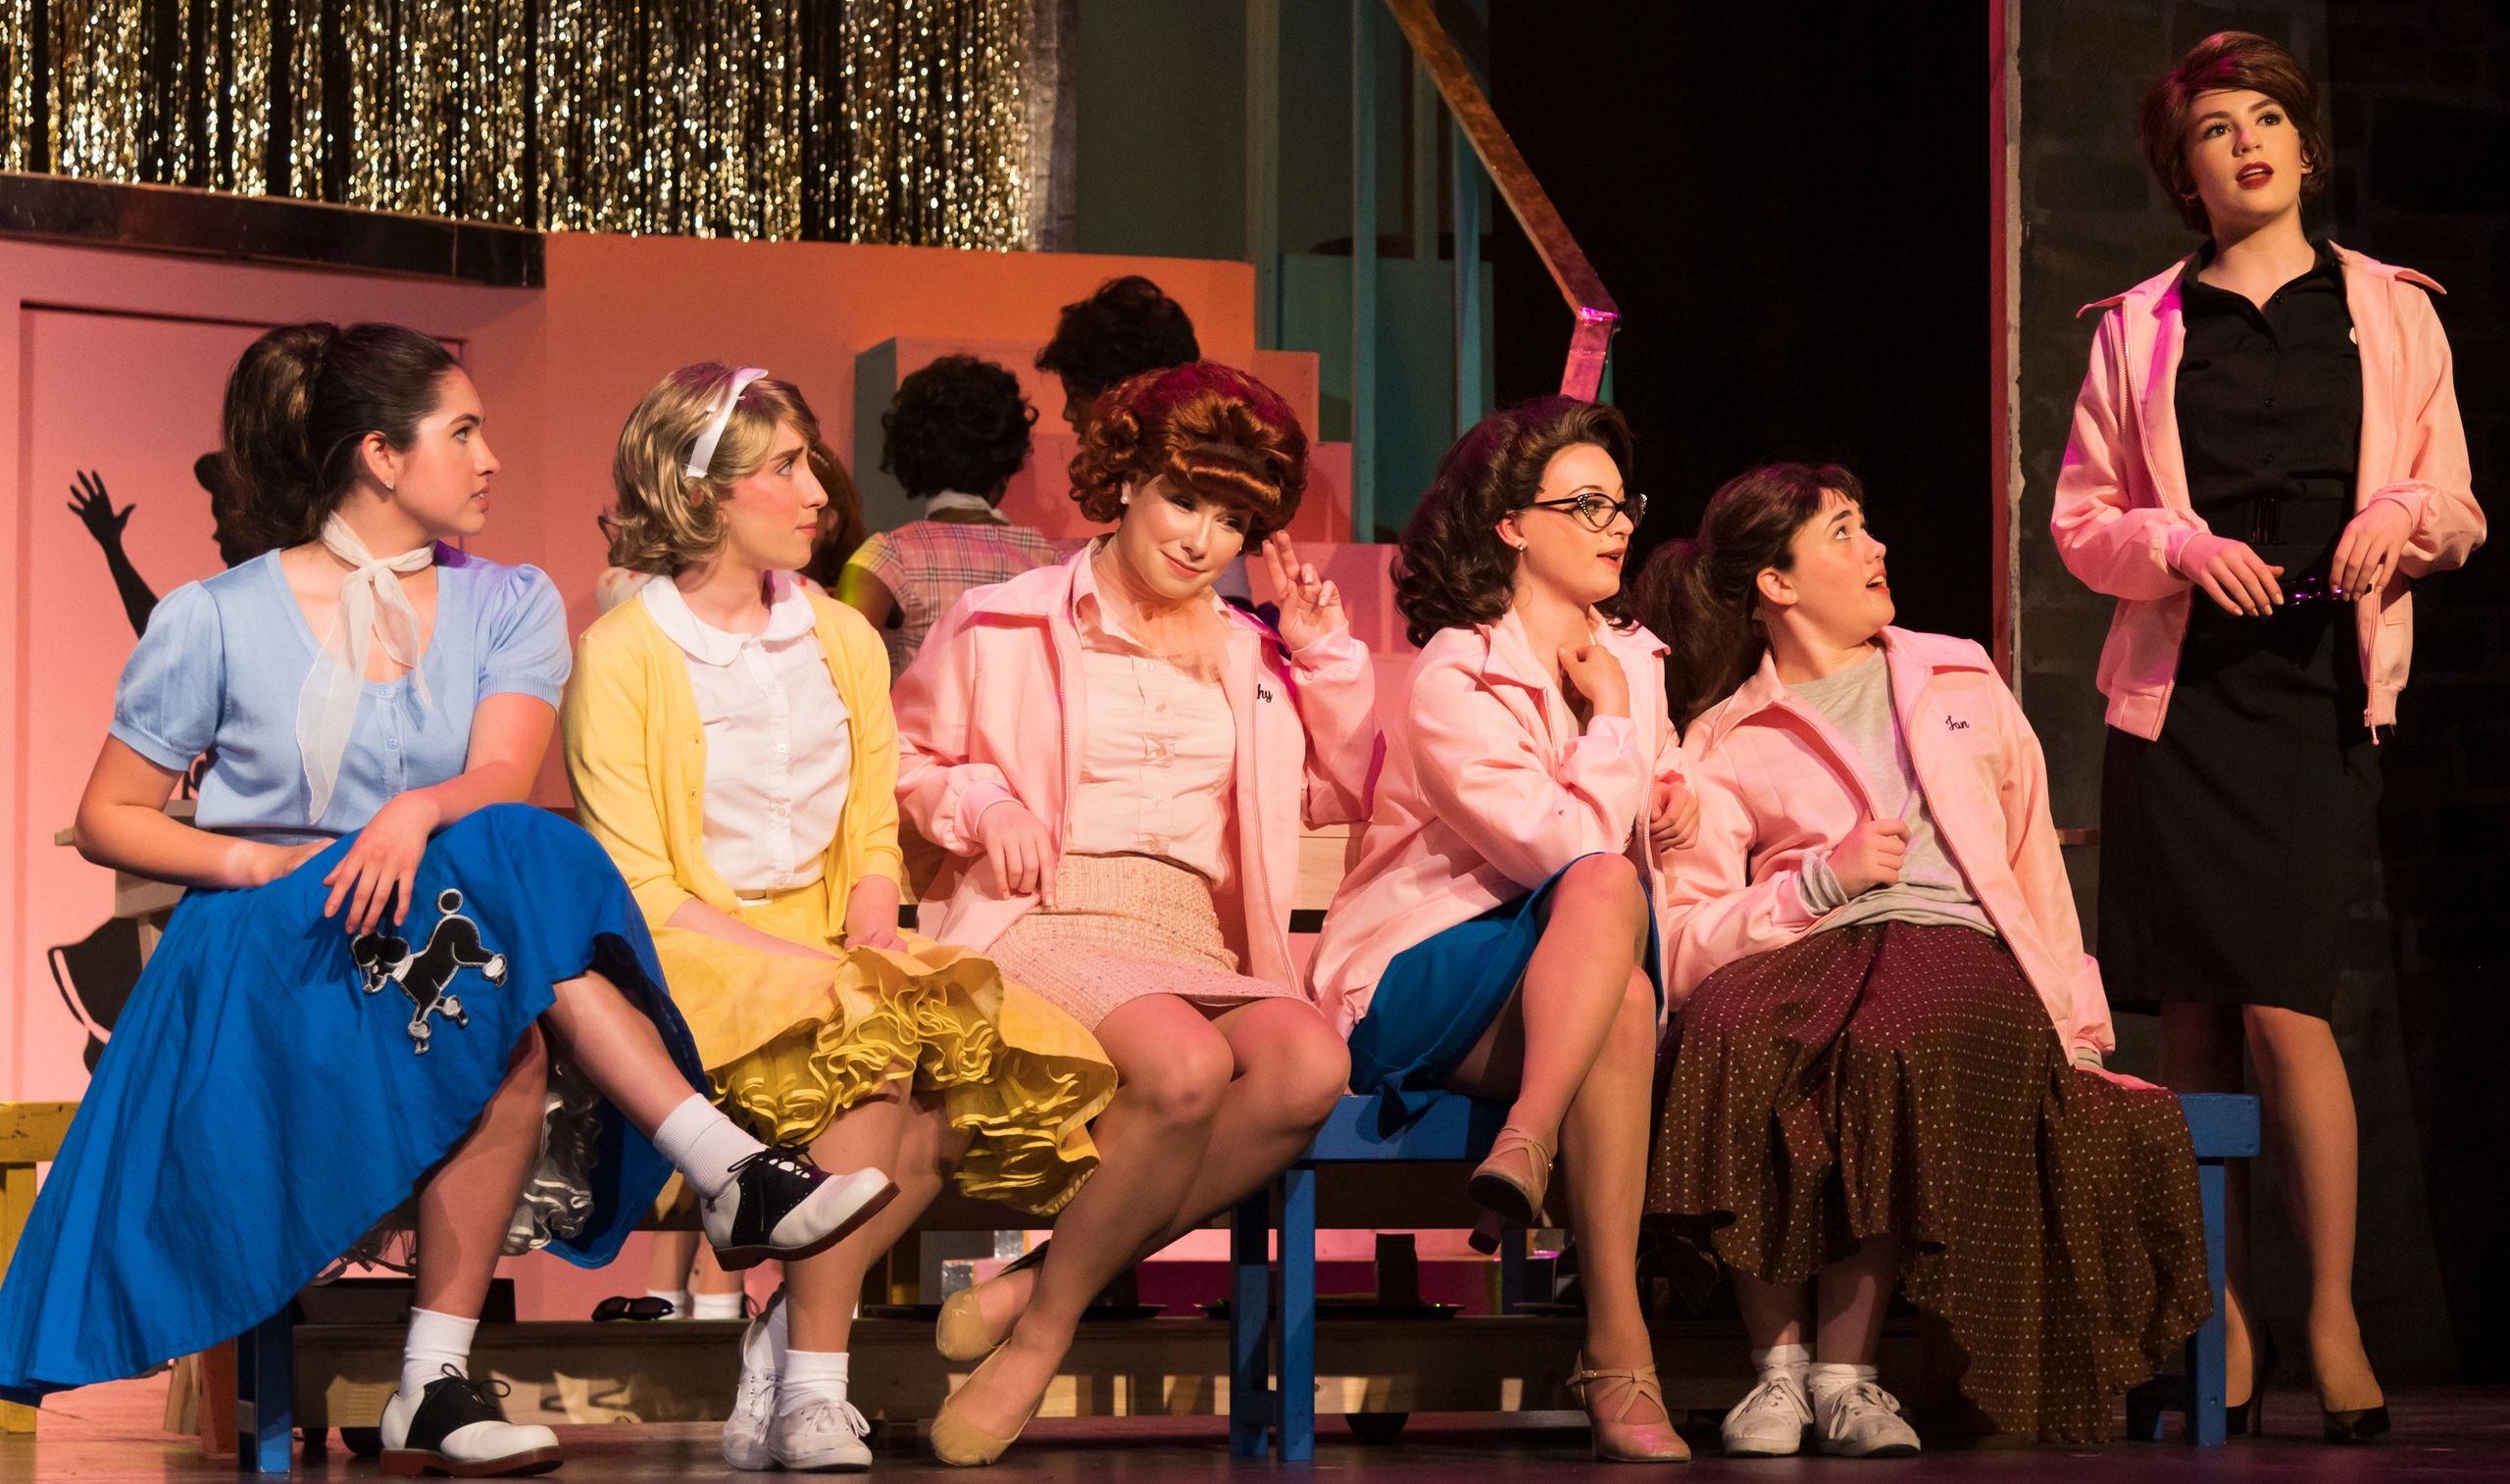 Grease Plays Till May 22nd at the Rivertown Theater